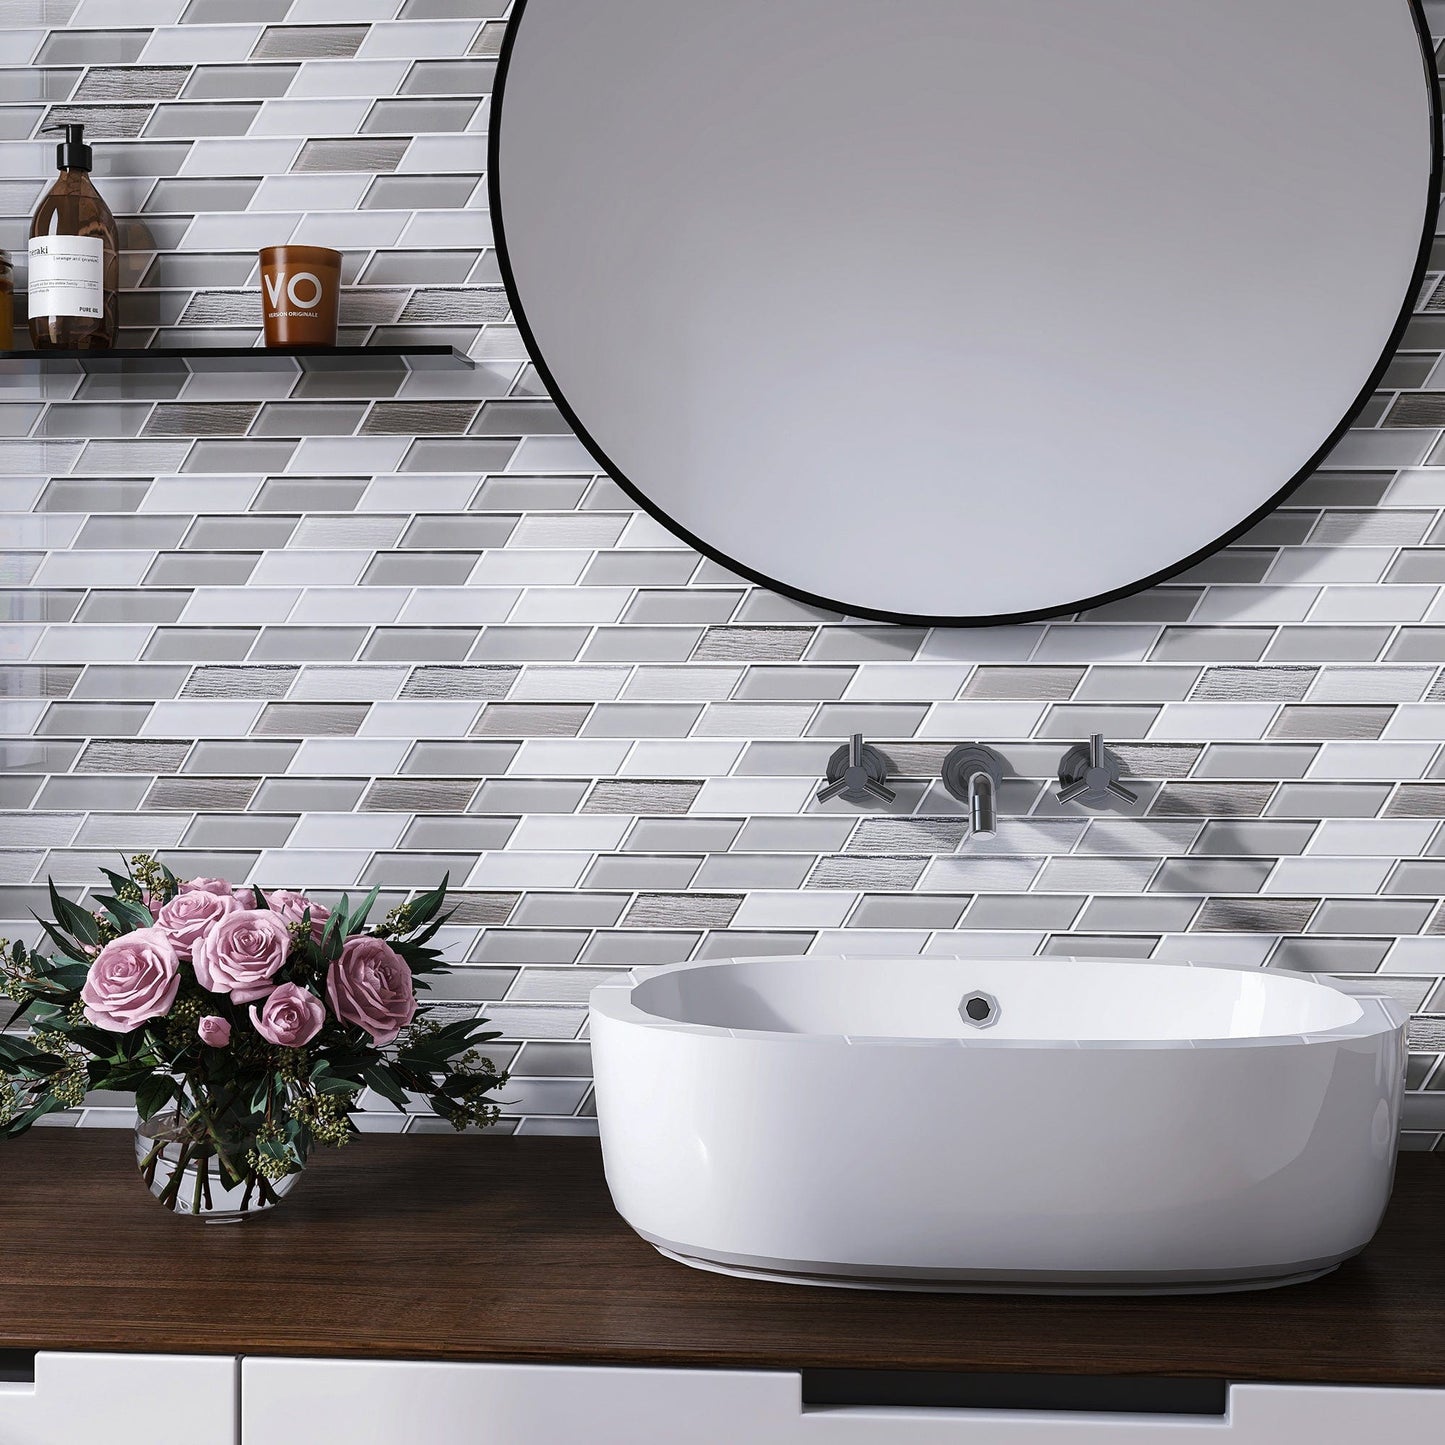 shop for mosaic tile with free fast shipping - cherytile